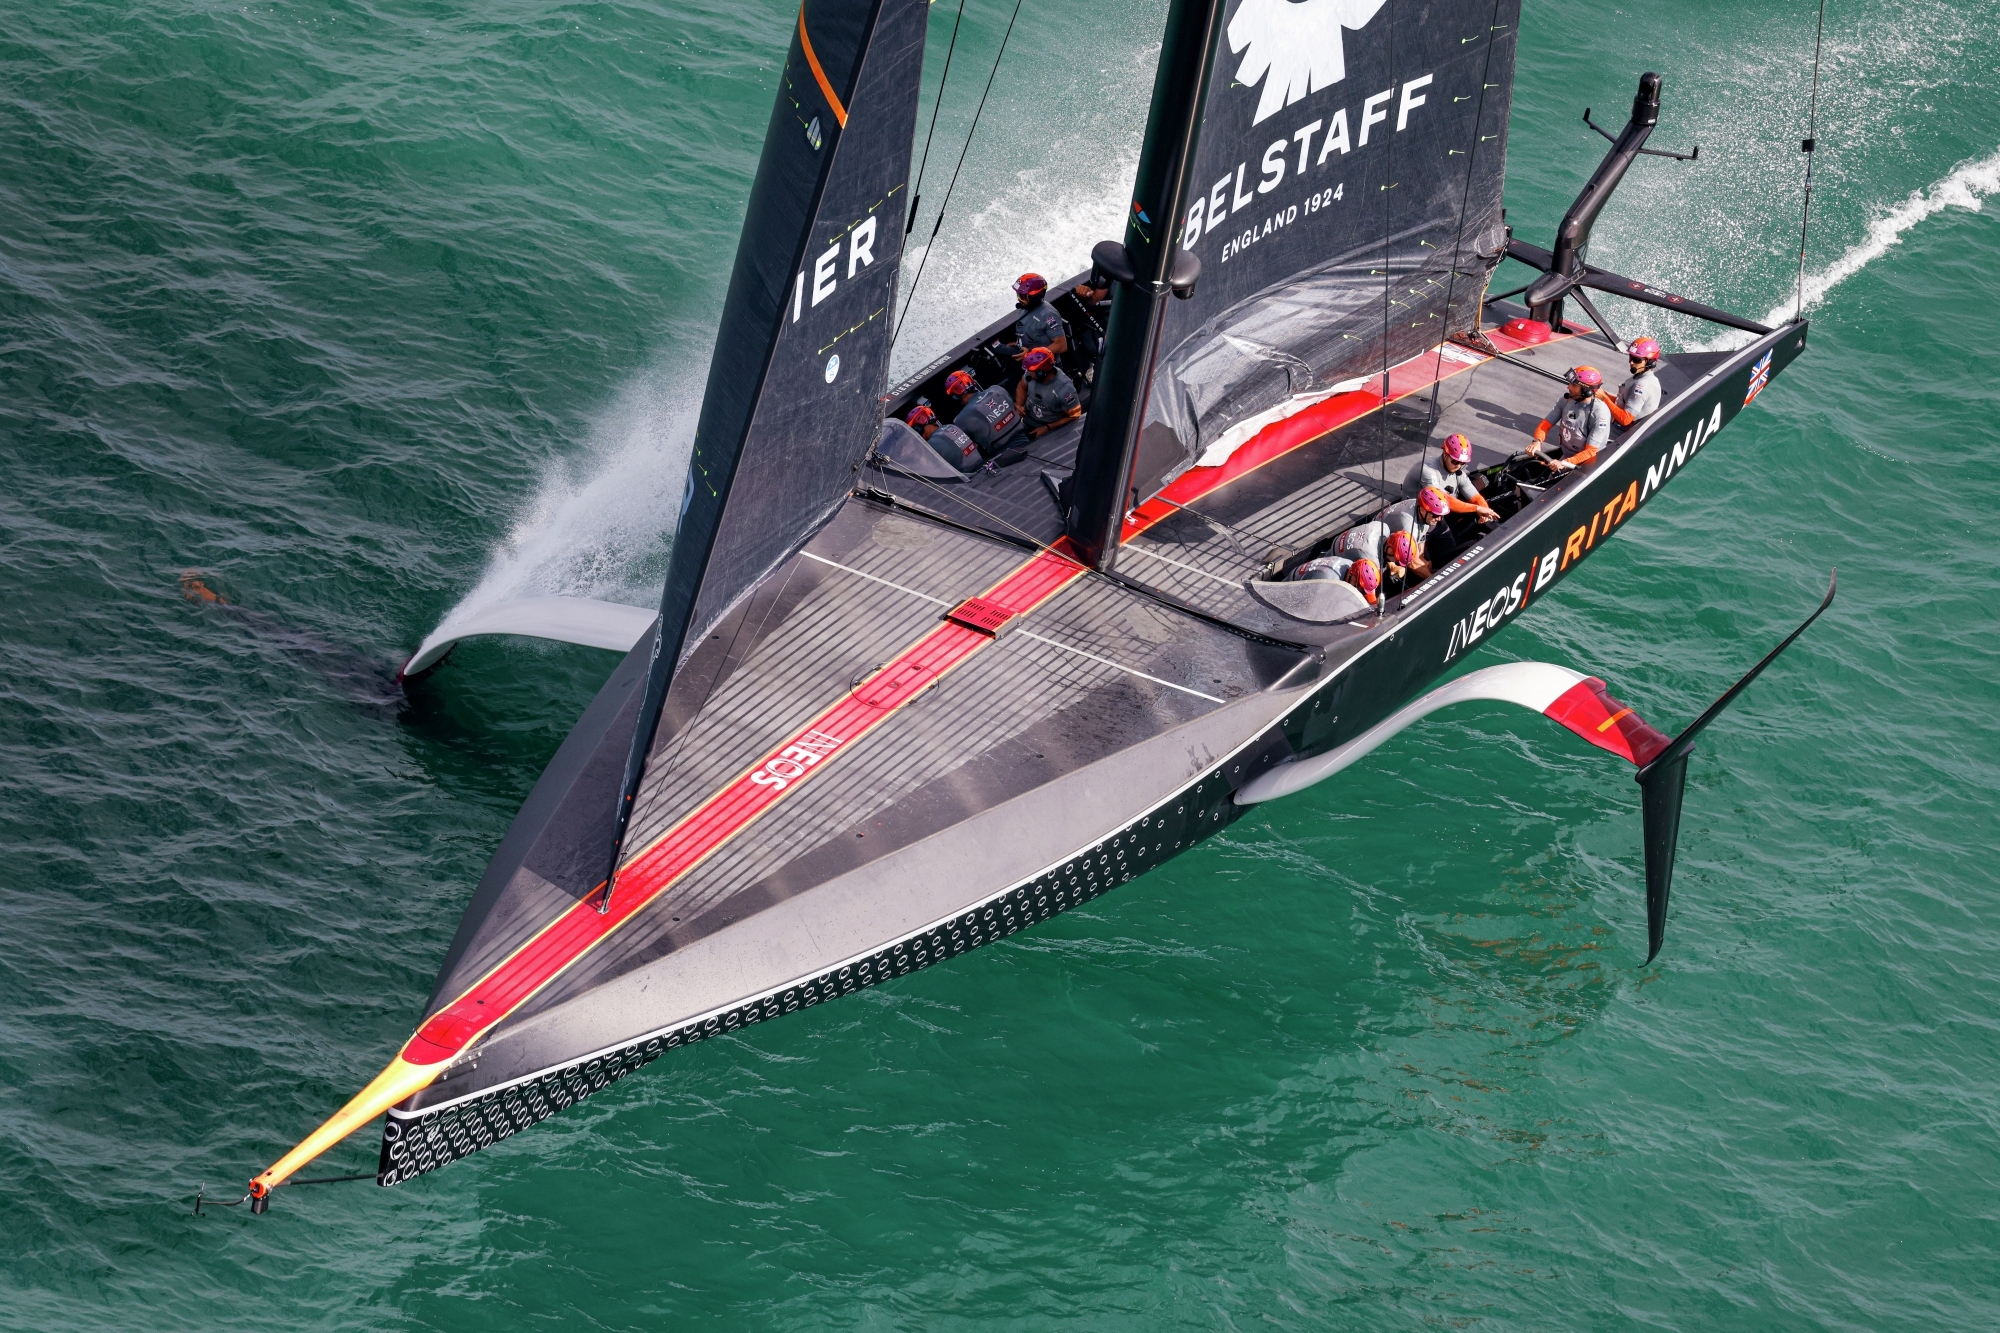  AC75  PradaCup  Auckland NZL  Day 2  two defeats for American Magic